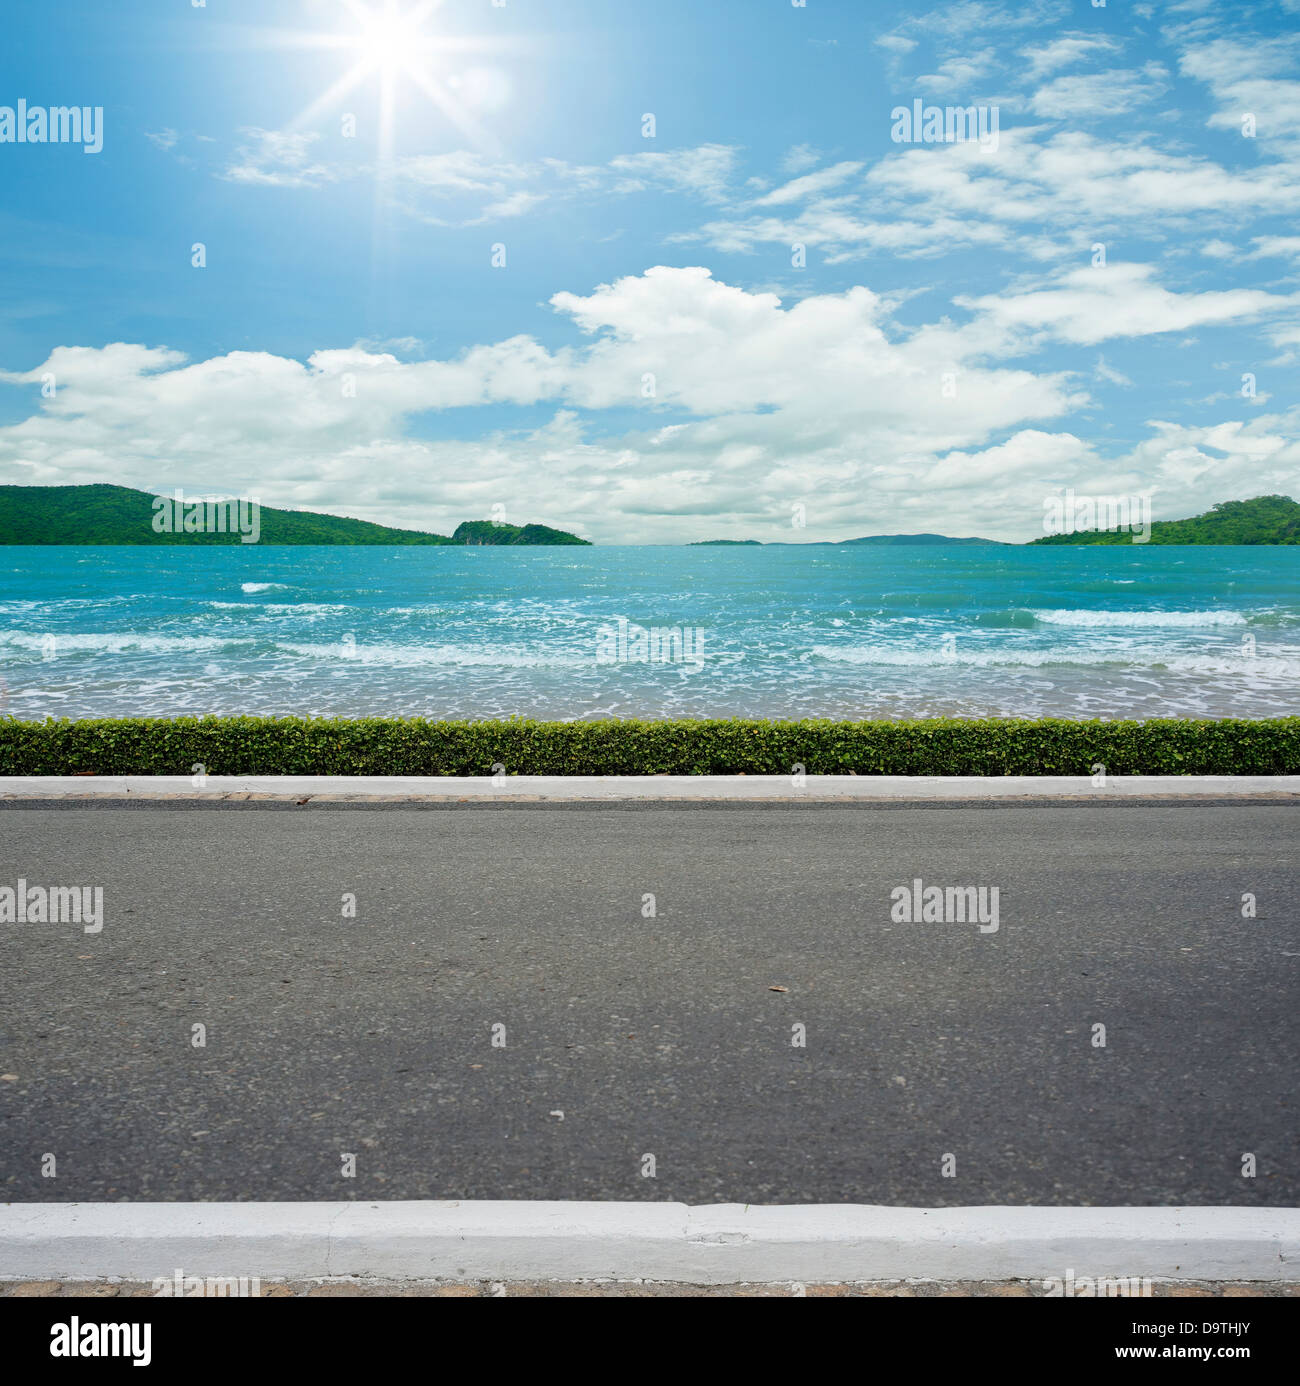 Road side beach view background Stock Photo